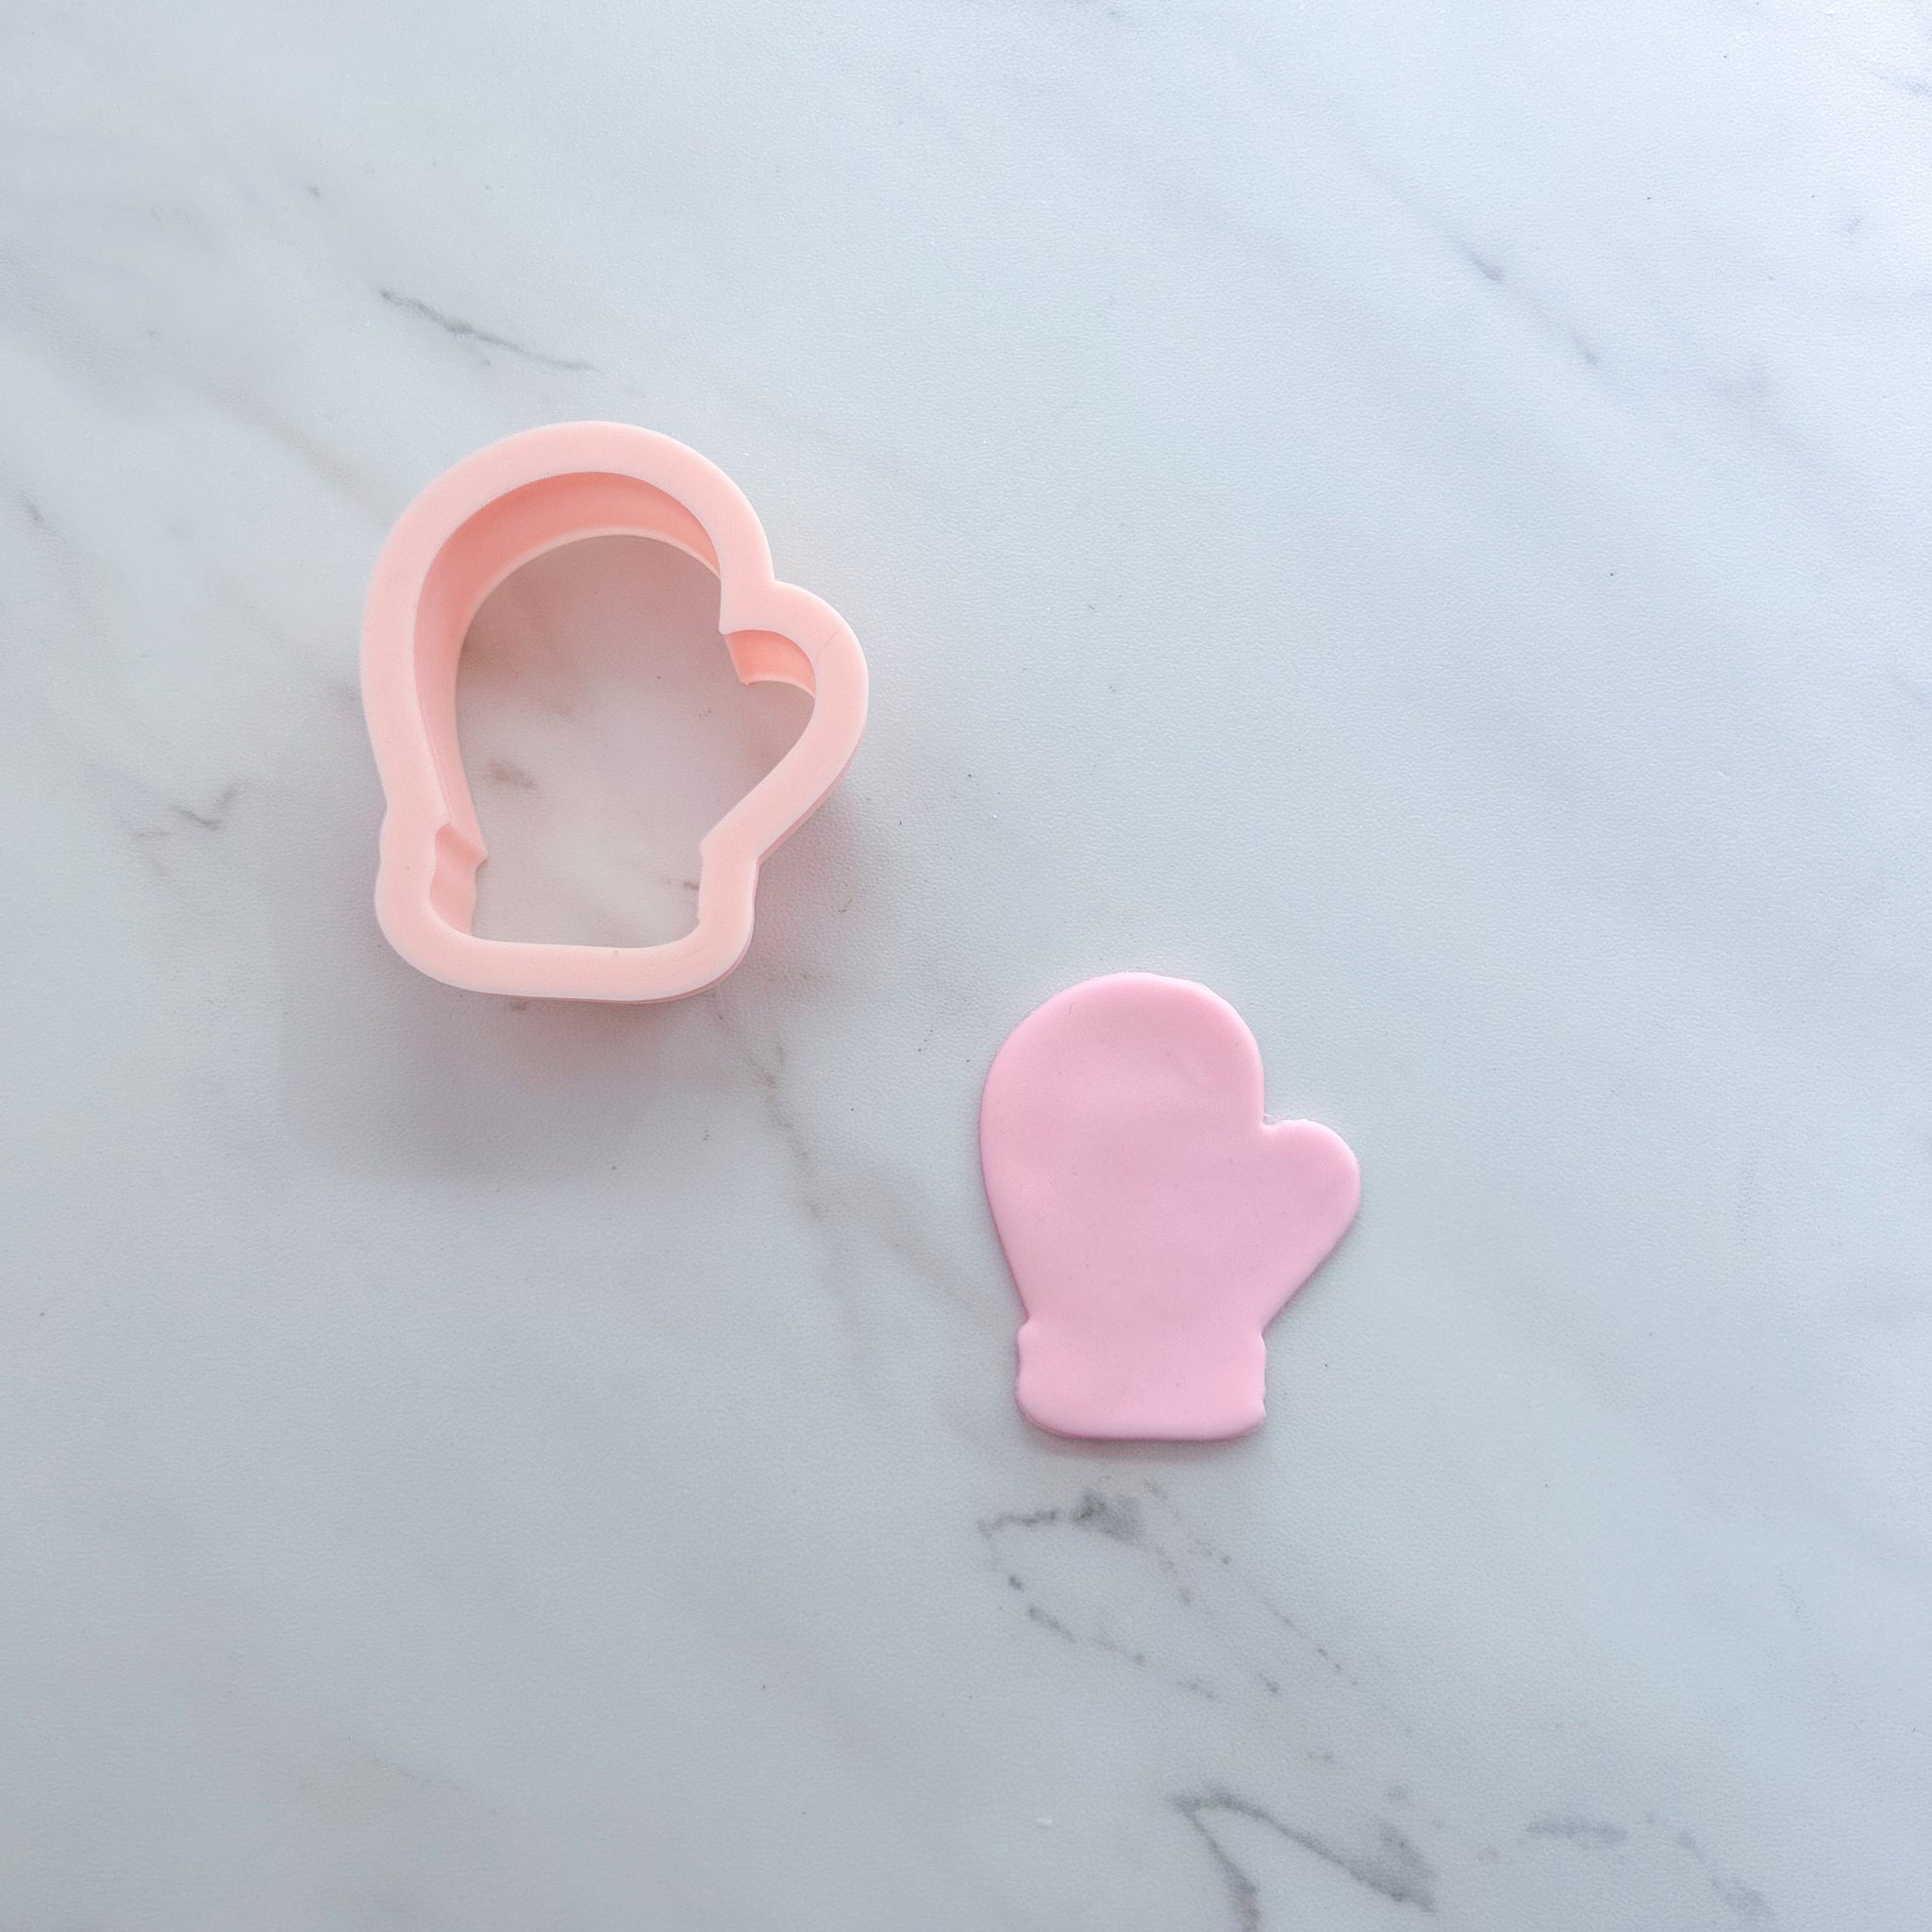 MINI MITTEN COOKIE CUTTER BY SAIDAS SWEETS